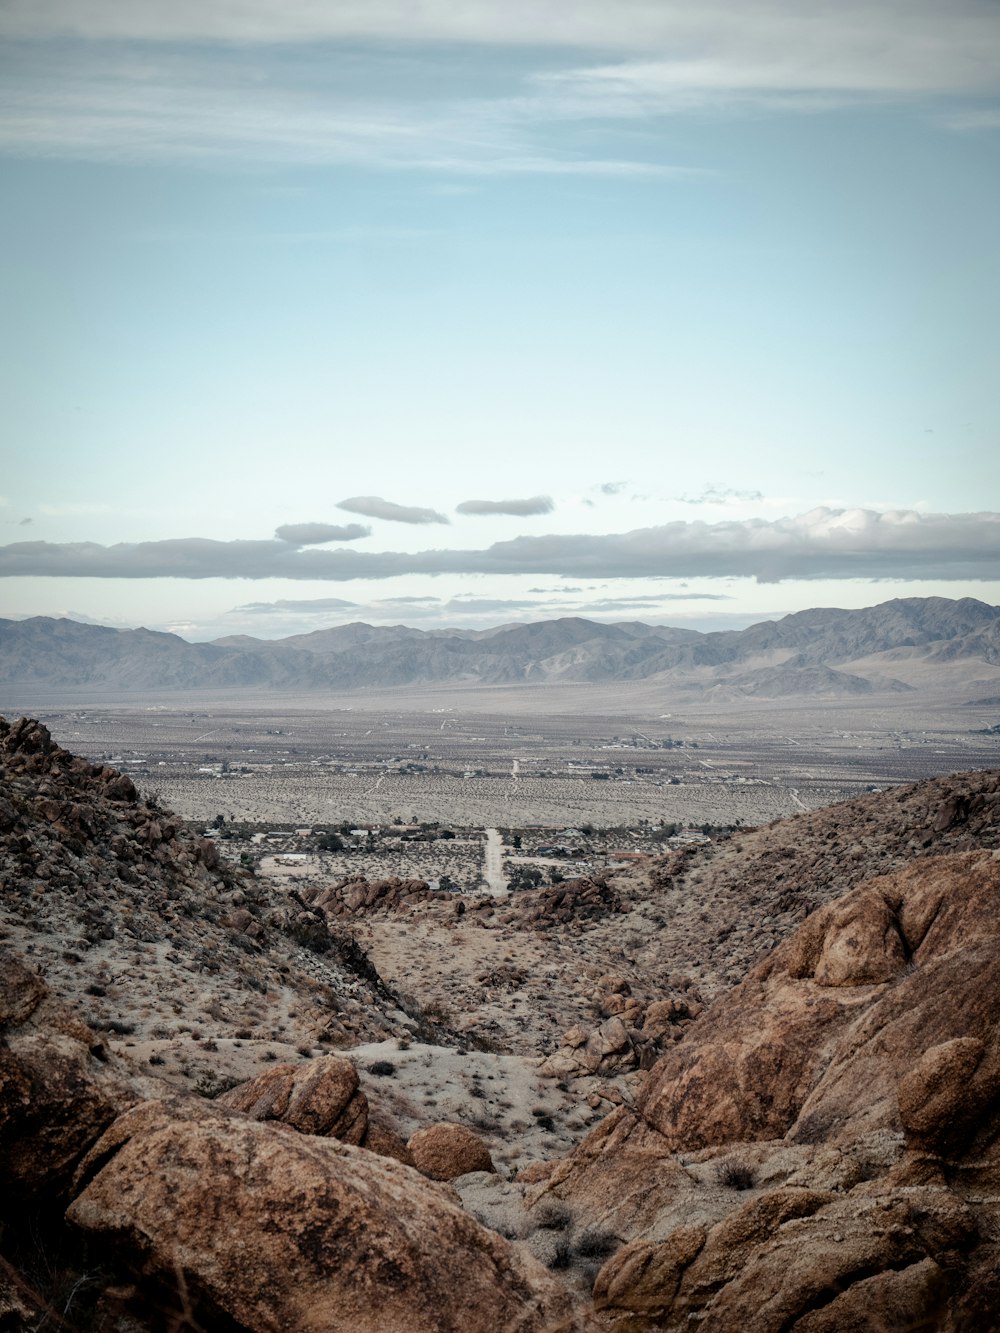 a view of a desert with mountains in the distance